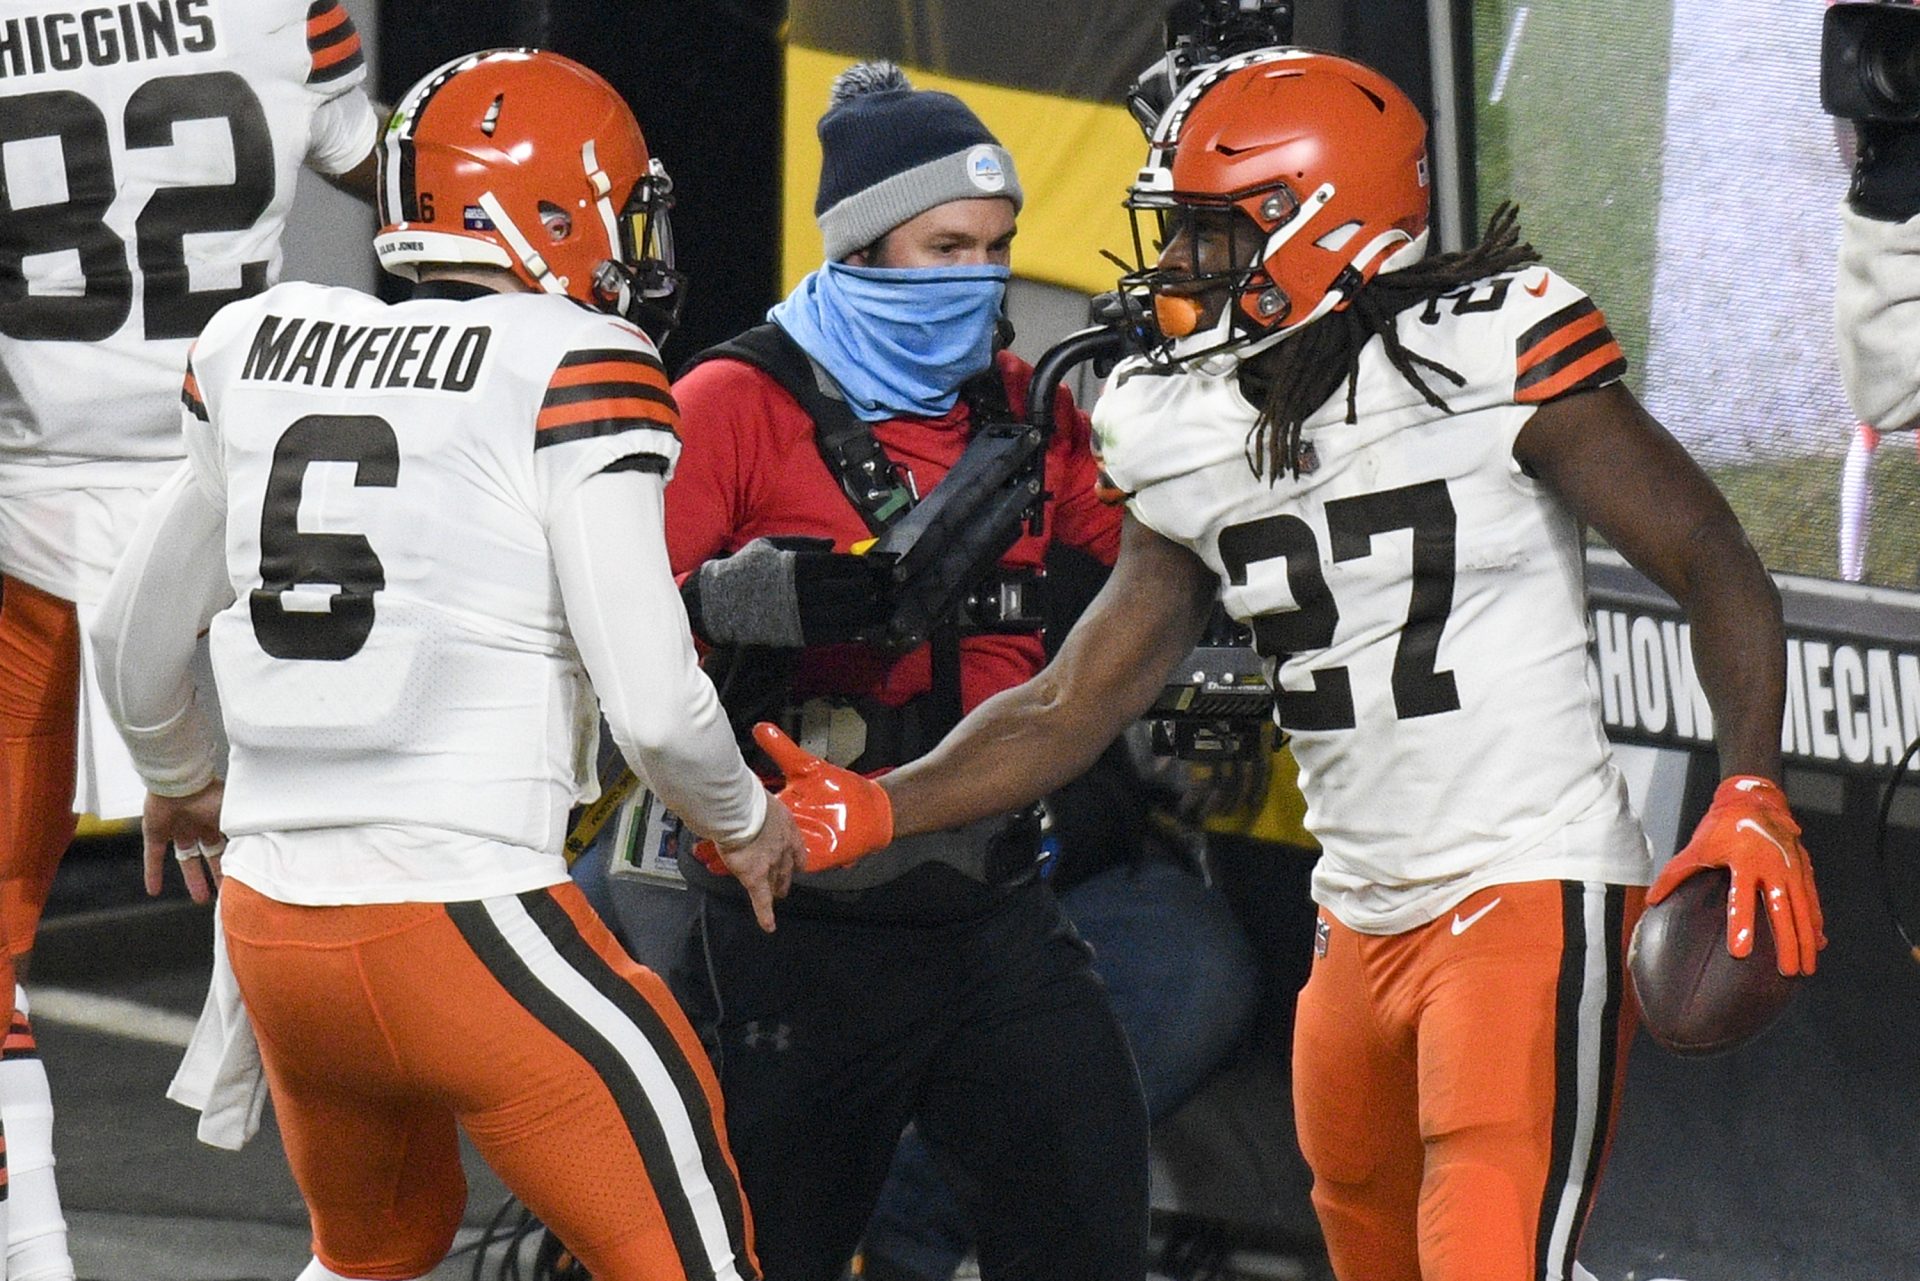 Cleveland Browns running back Kareem Hunt (27) celebrates with quarterback Baker Mayfield (6) after scoring on an eight-yard run during the first half of an NFL wild-card playoff football game against the Pittsburgh Steelers in Pittsburgh, Sunday, Jan. 10, 2021.